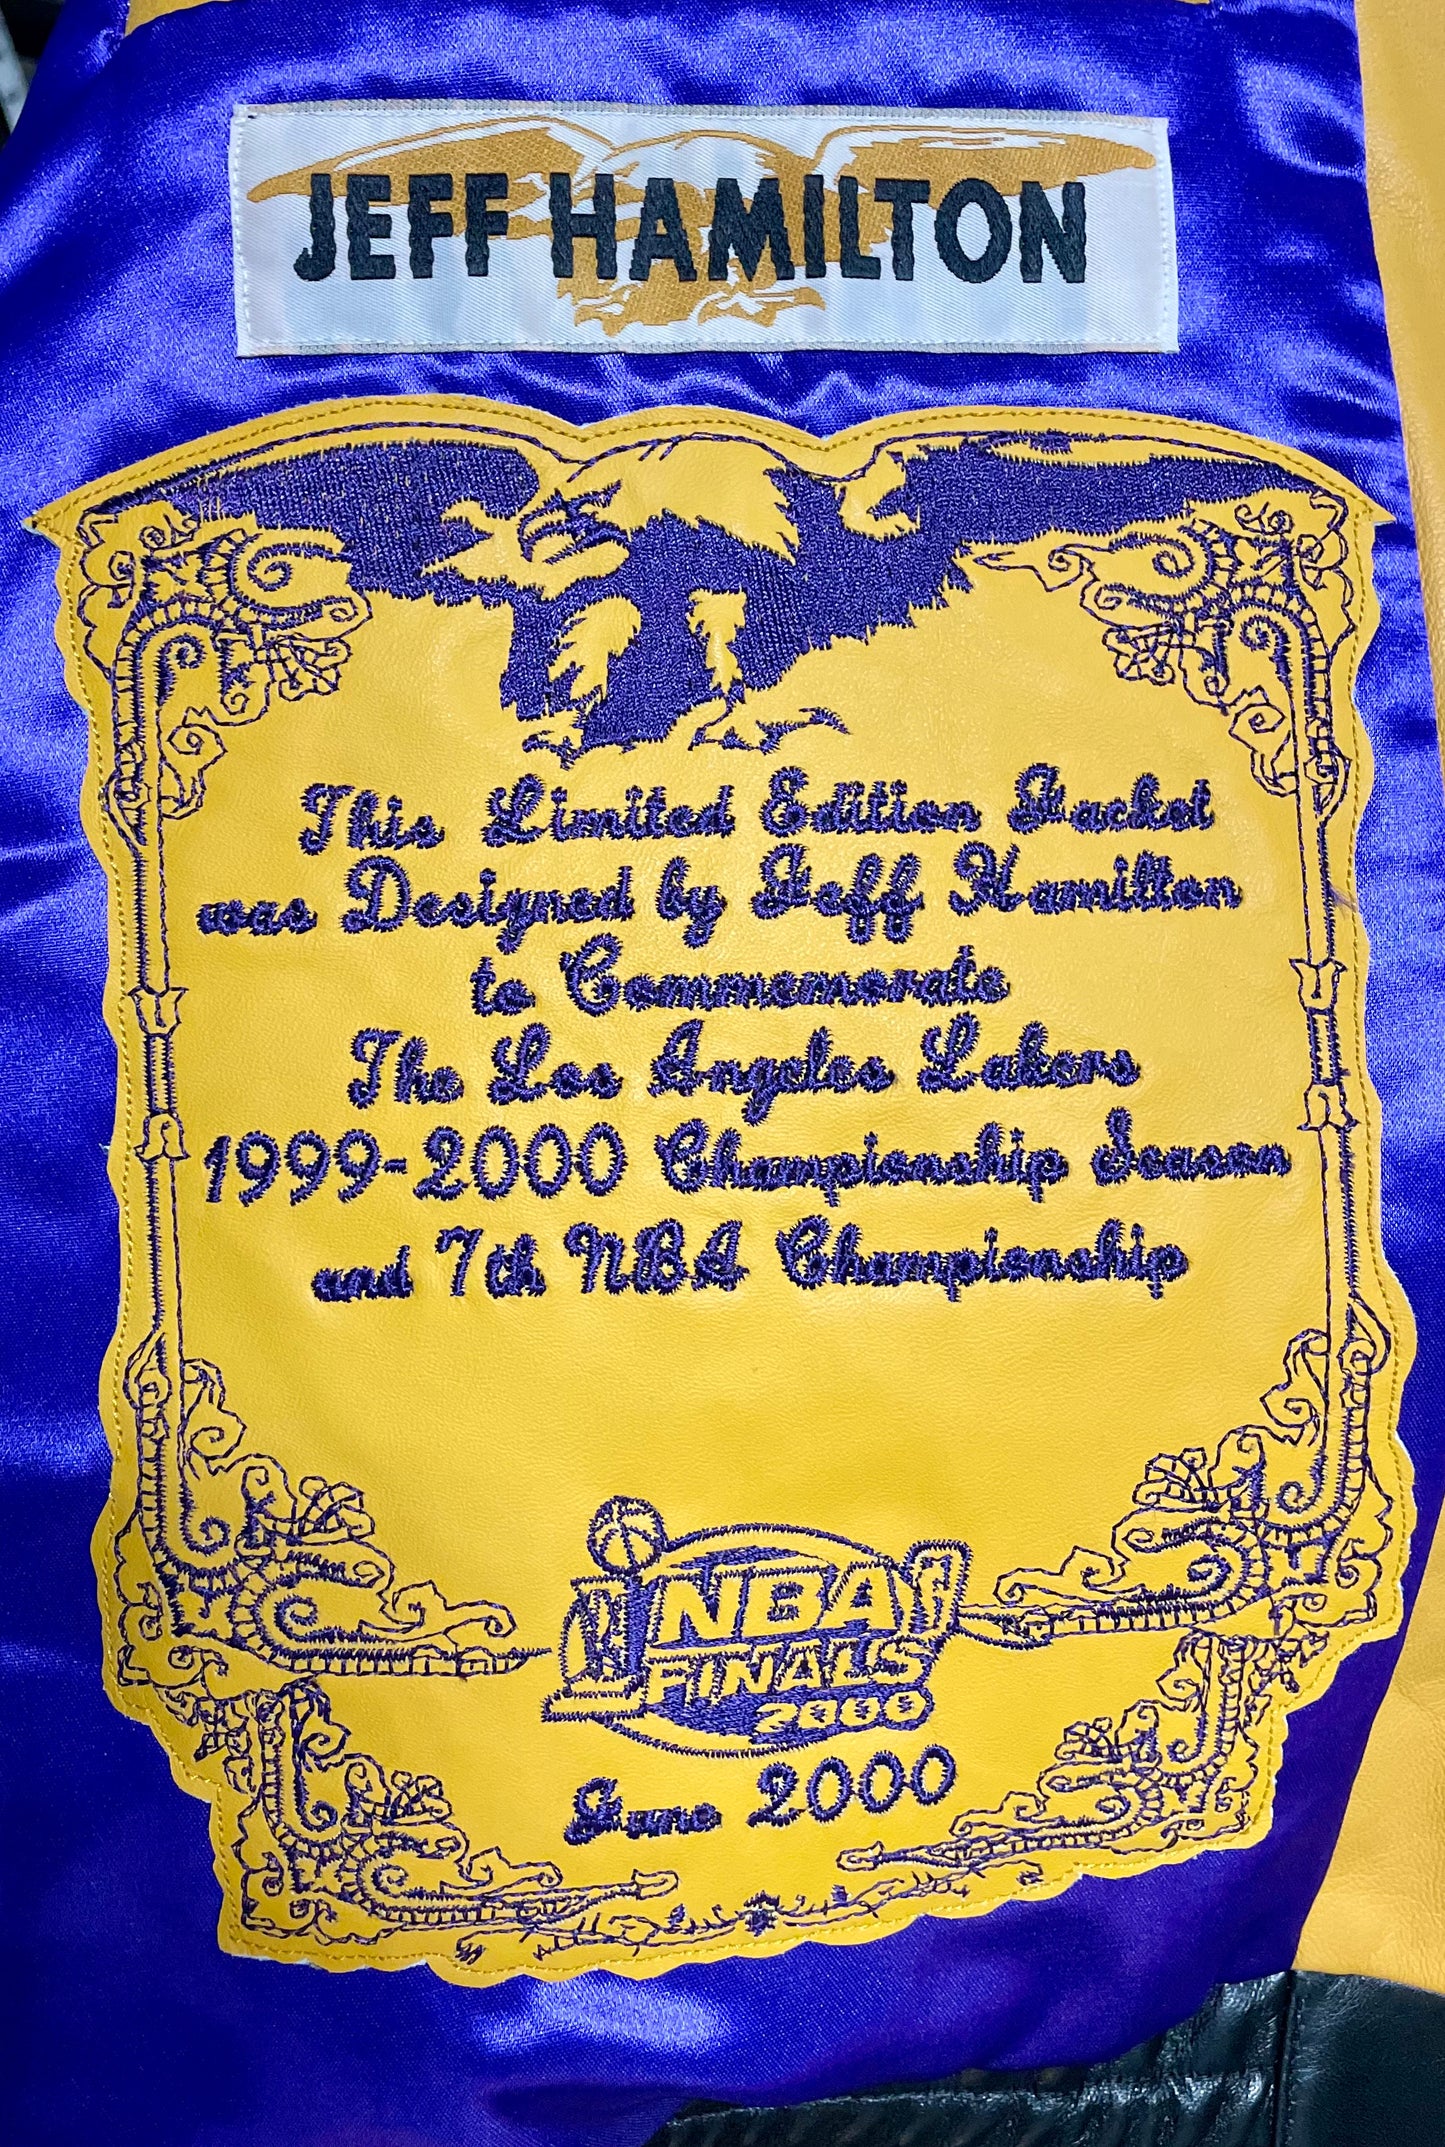 LOS ANGELES LAKERS 2000 CHAMPIONSHIP GENUINE LEATHER JACKET